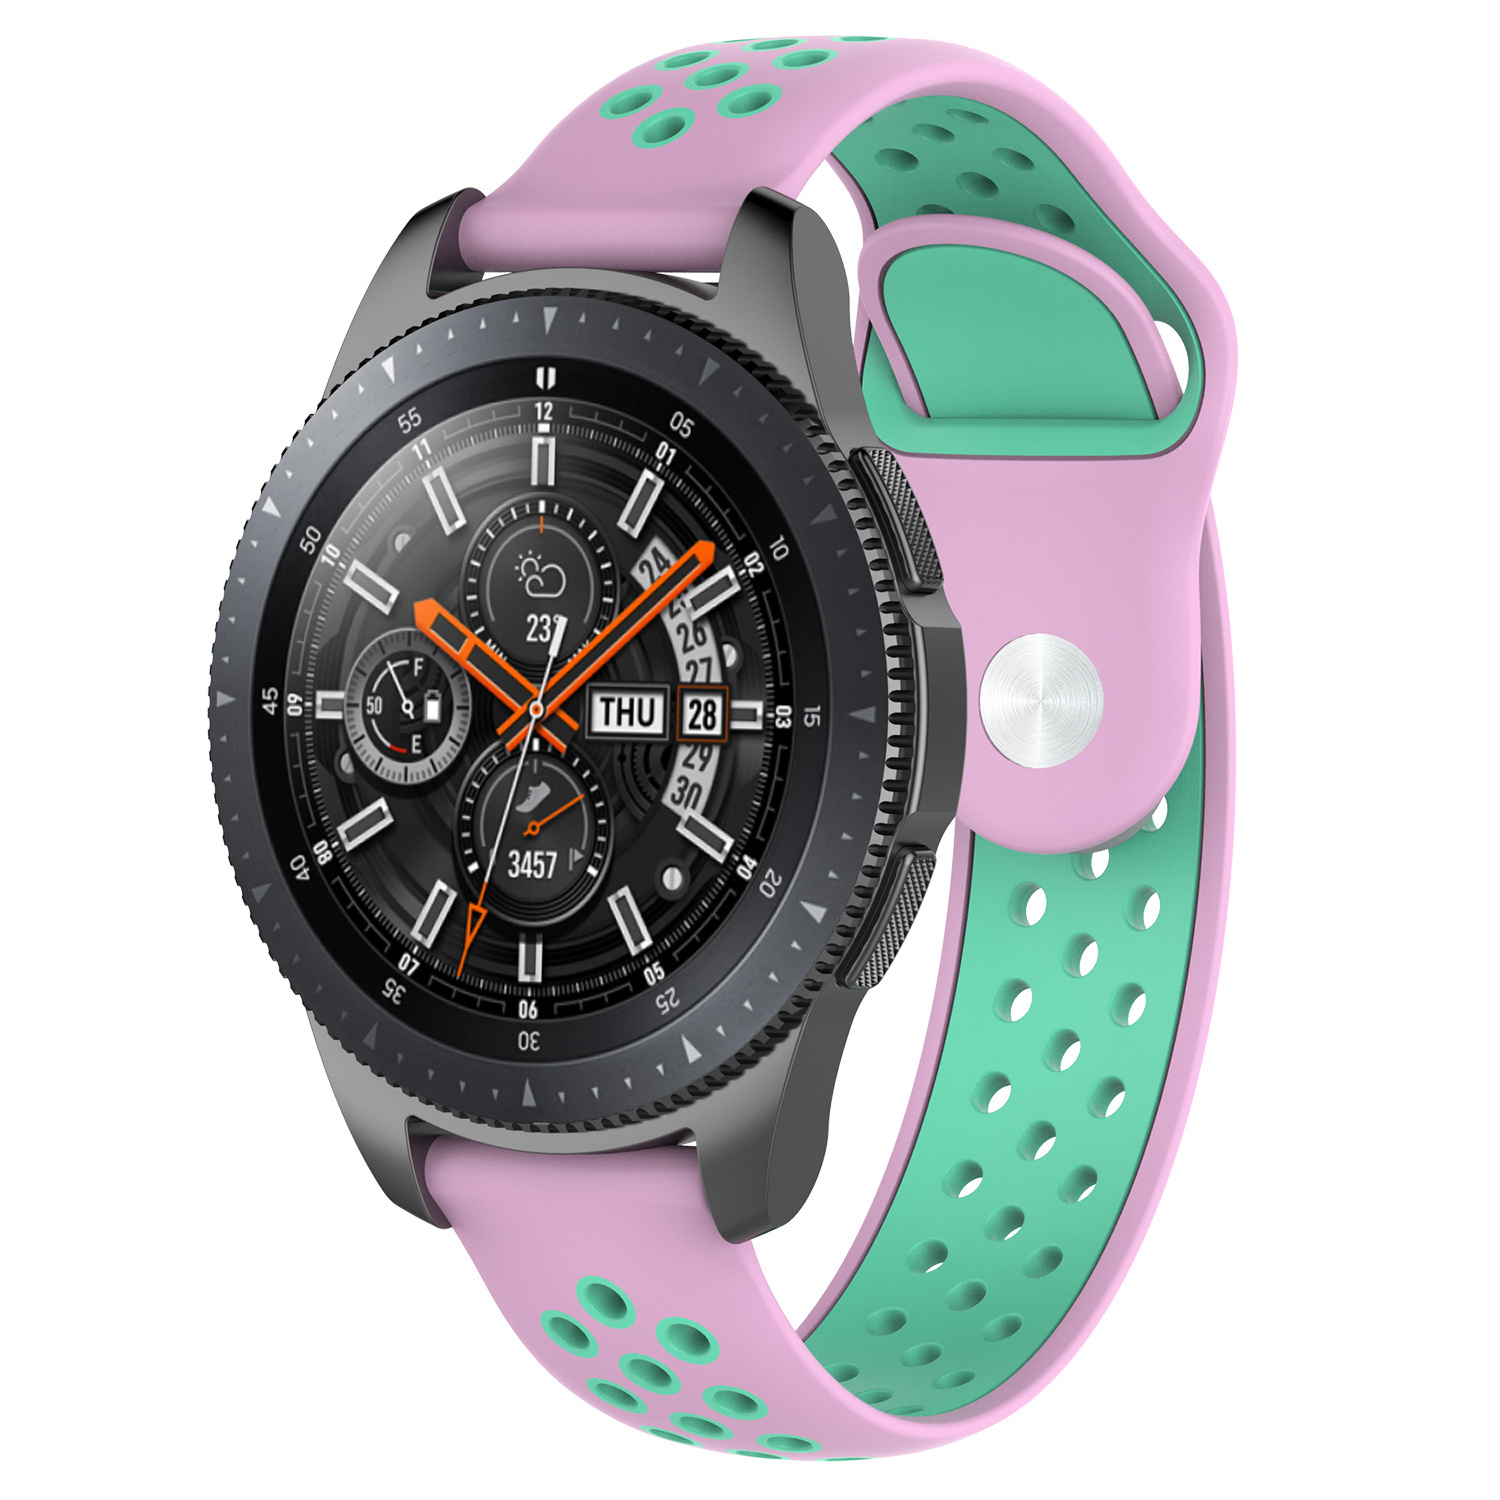 Samsung Galaxy Watch Double Sport Strap - Pink Teal